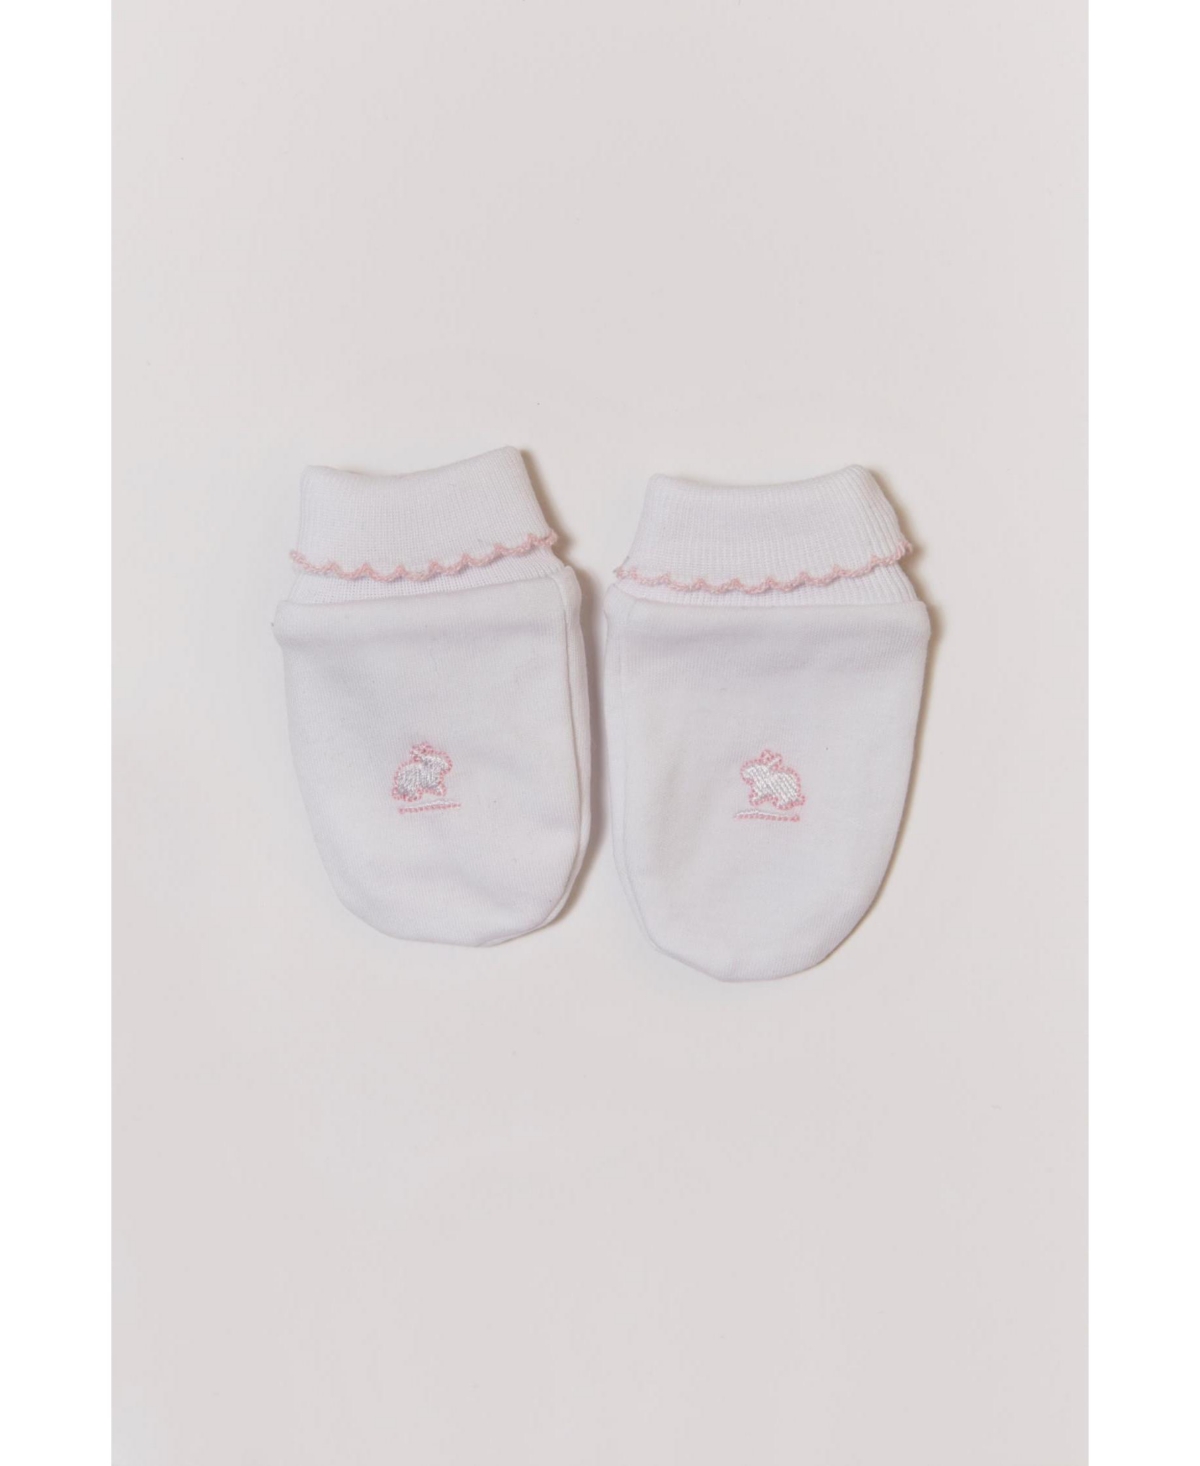 Babycottons Girls Logo White With Pink Cuffed Mittens Made With Peruvian Pima Cotton For Infants